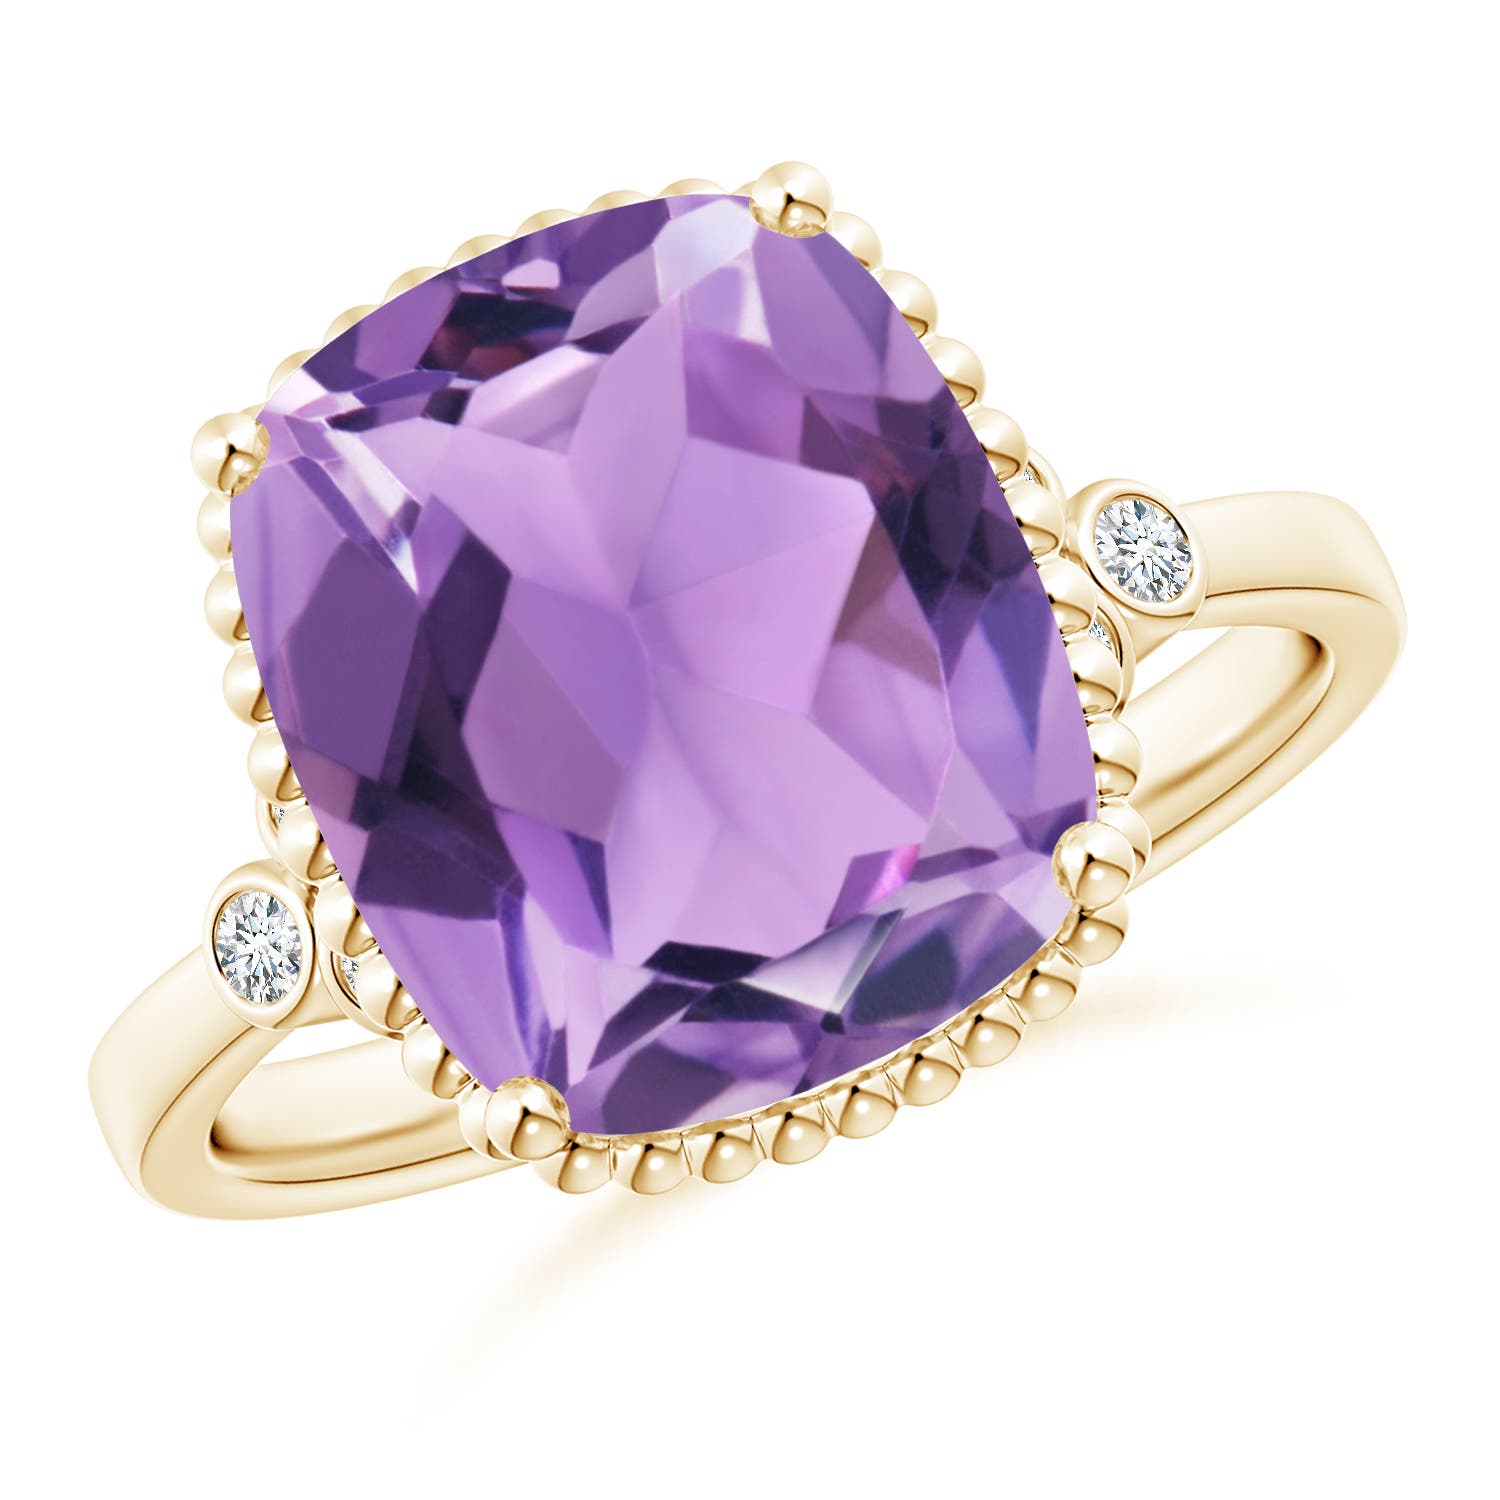 A - Amethyst / 4.71 CT / 14 KT Yellow Gold